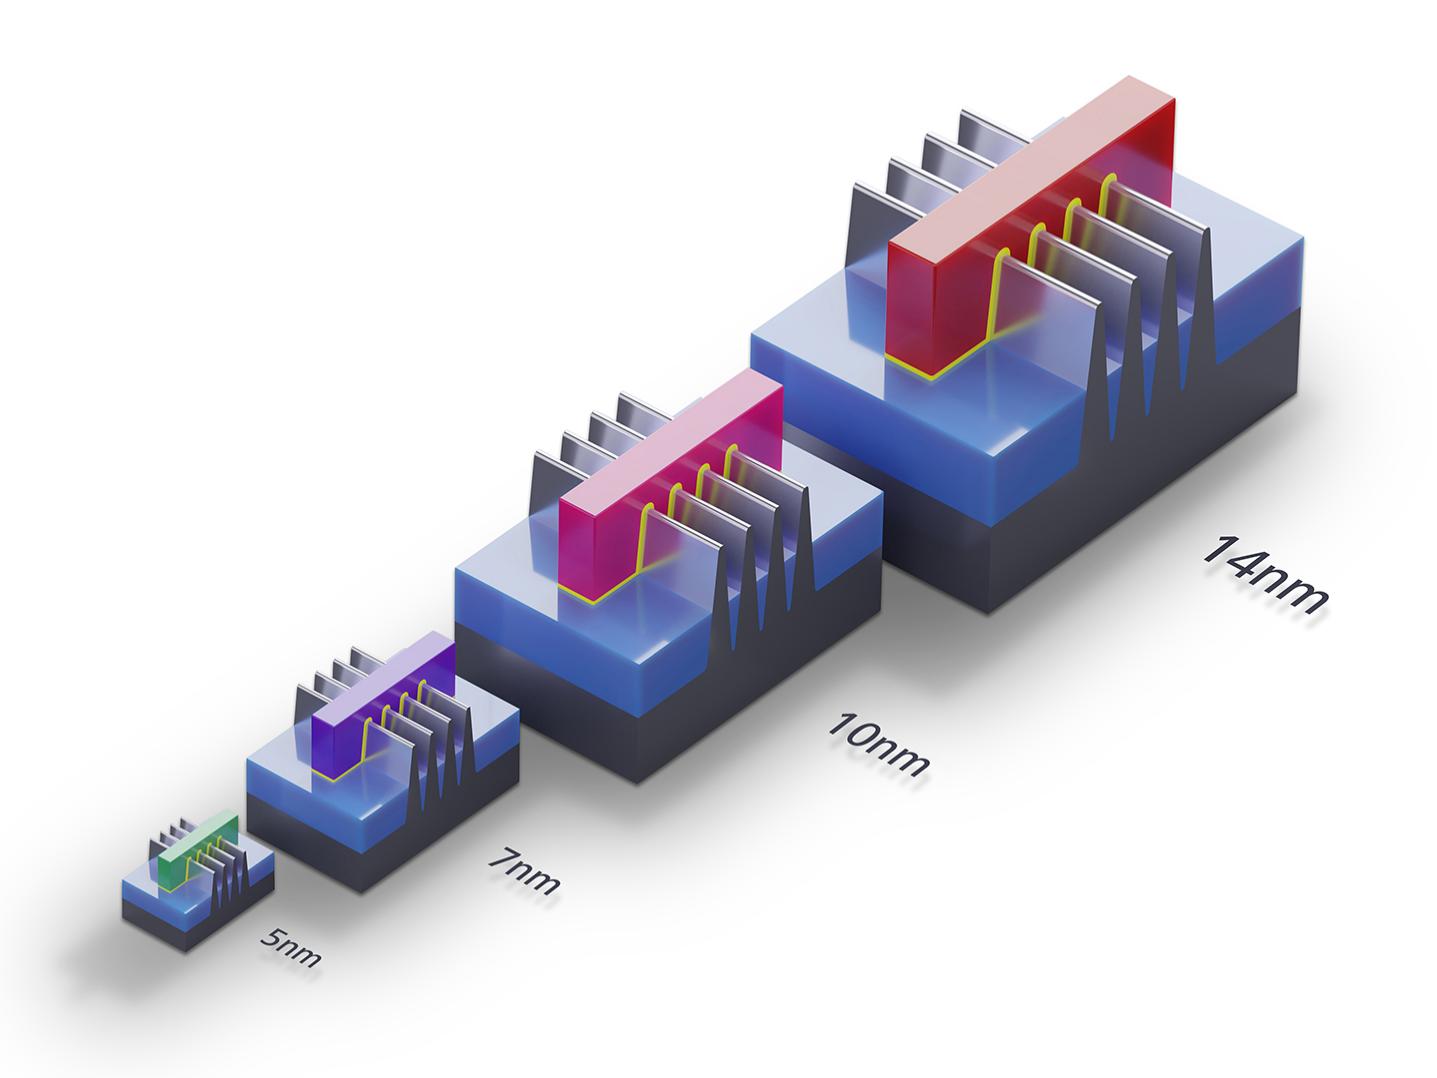 FinFET transistors for 14nm, 10nm, 7 nm, 5nm technology node of chip manufacturing process. 3D models compare the size and area. Illustration for Moore's law and semiconductor transistor roadmap.